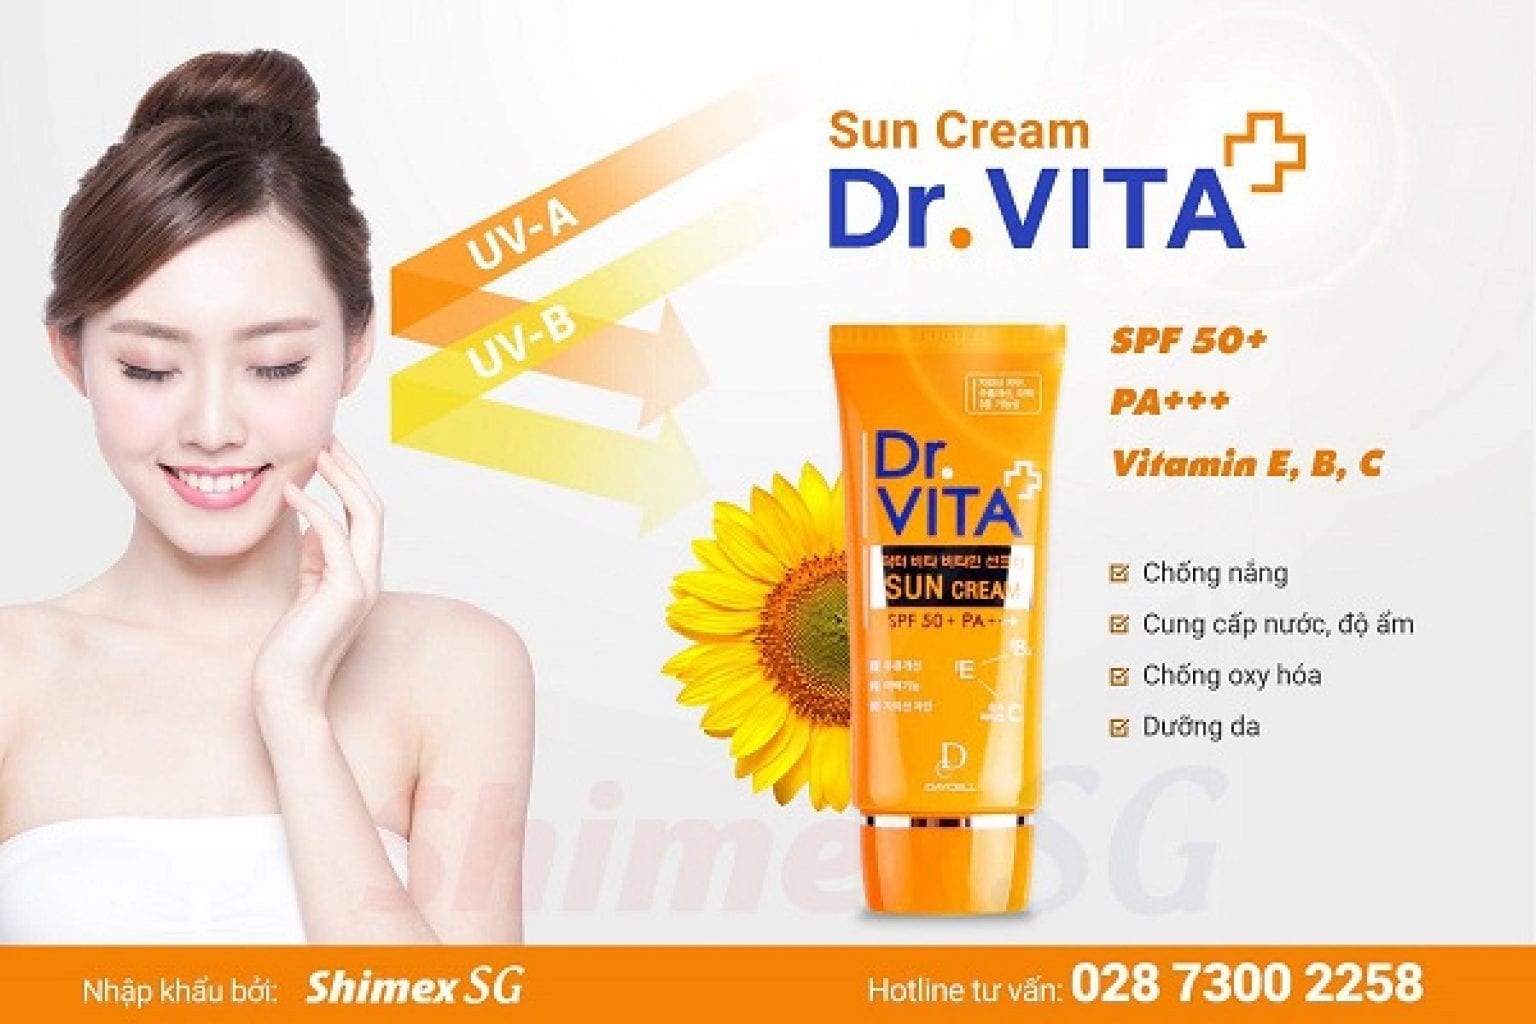 download what vitamin is the sun